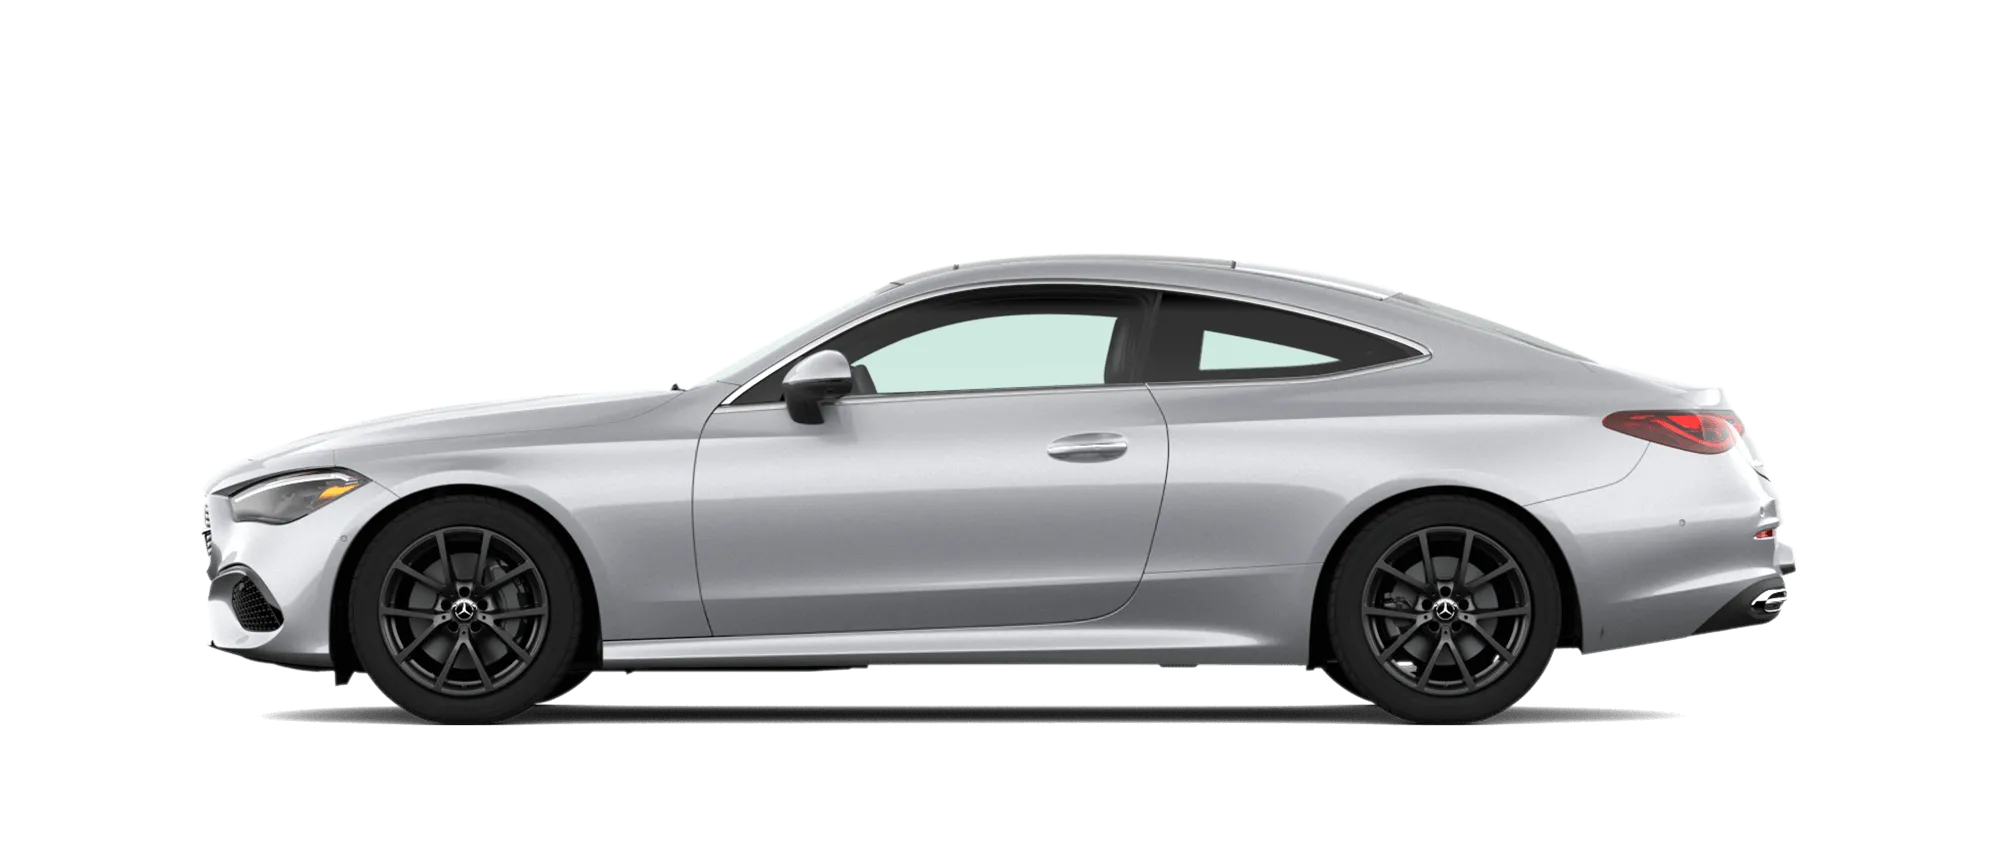 CLE 300 4MATIC Coupe Vehicle